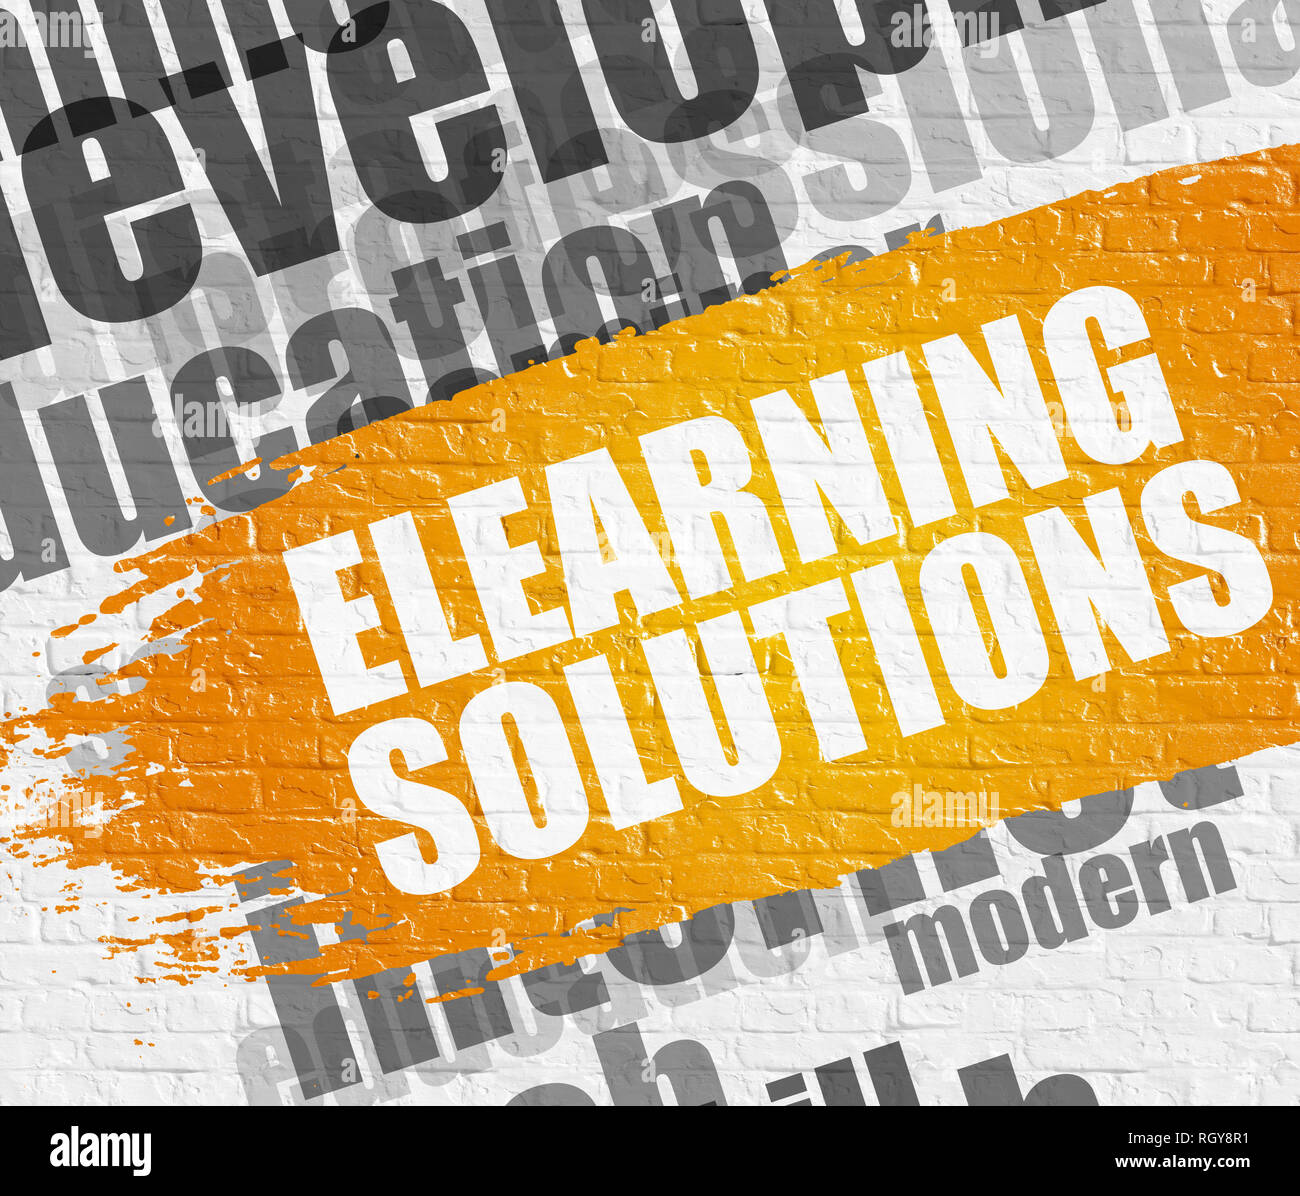 Solutions elearning sur Sedlescombe Golf. Wordcloud Concept. Banque D'Images